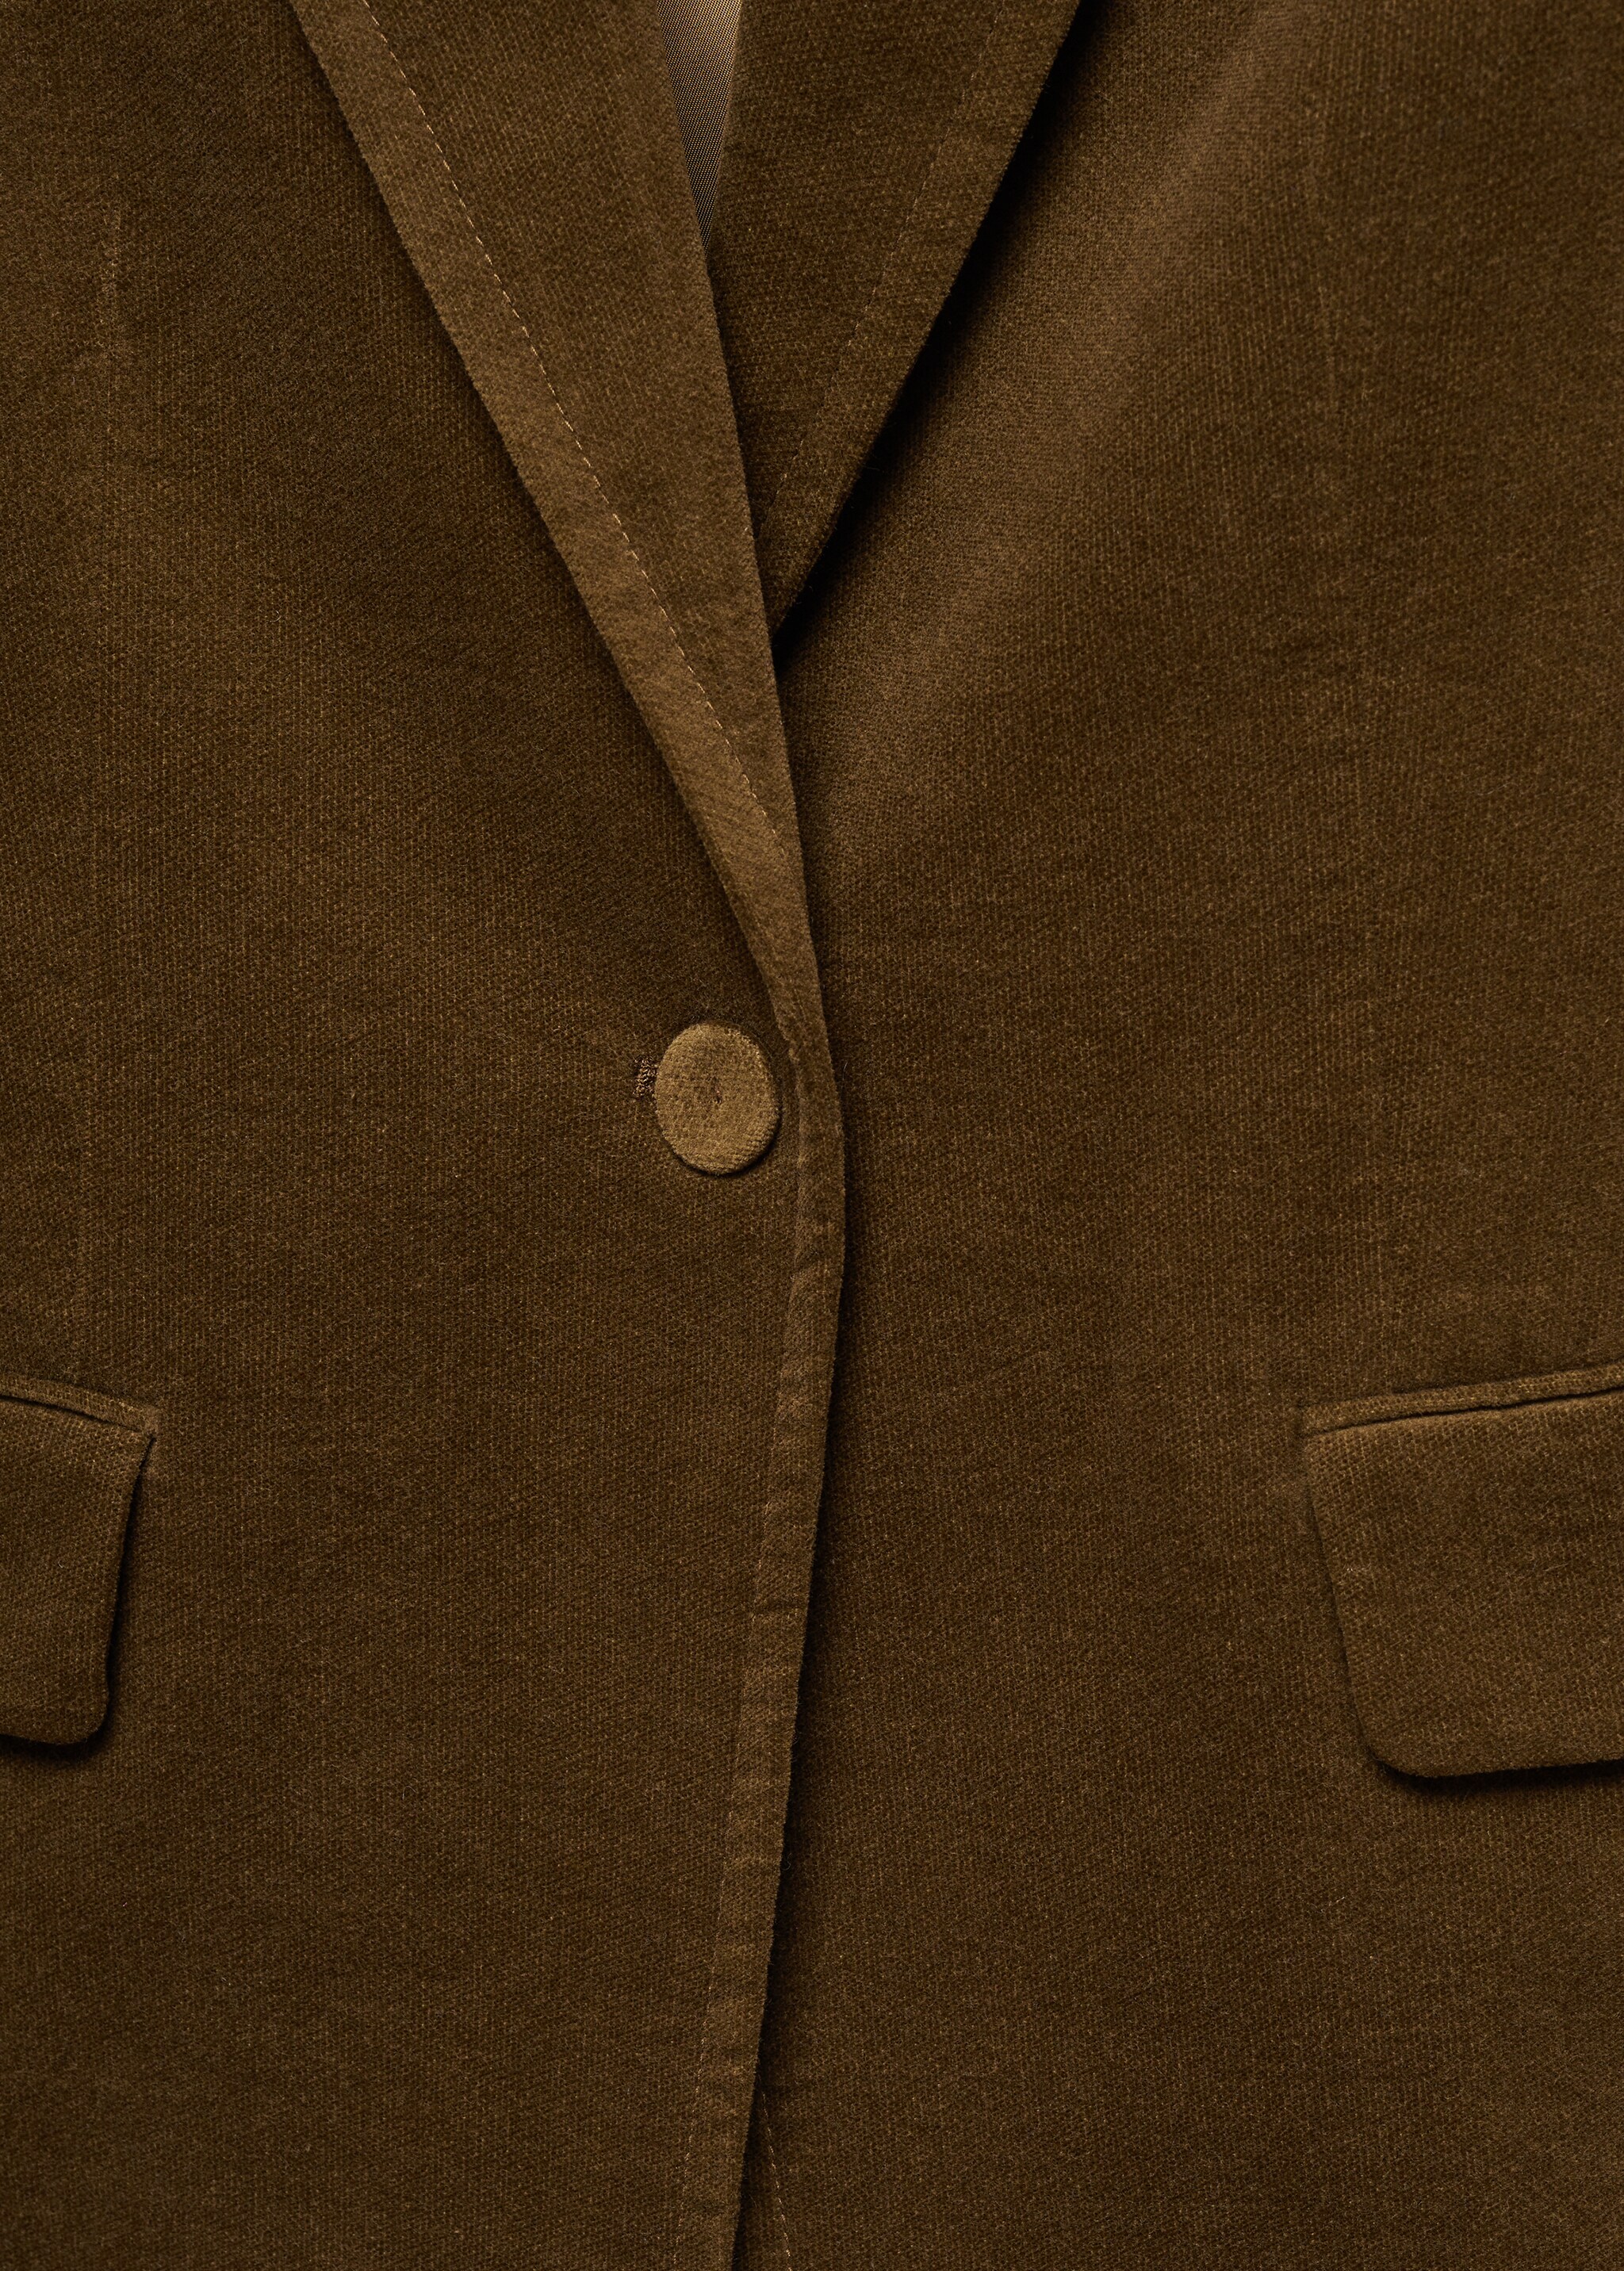 Velveteen suit jacket - Details of the article 8